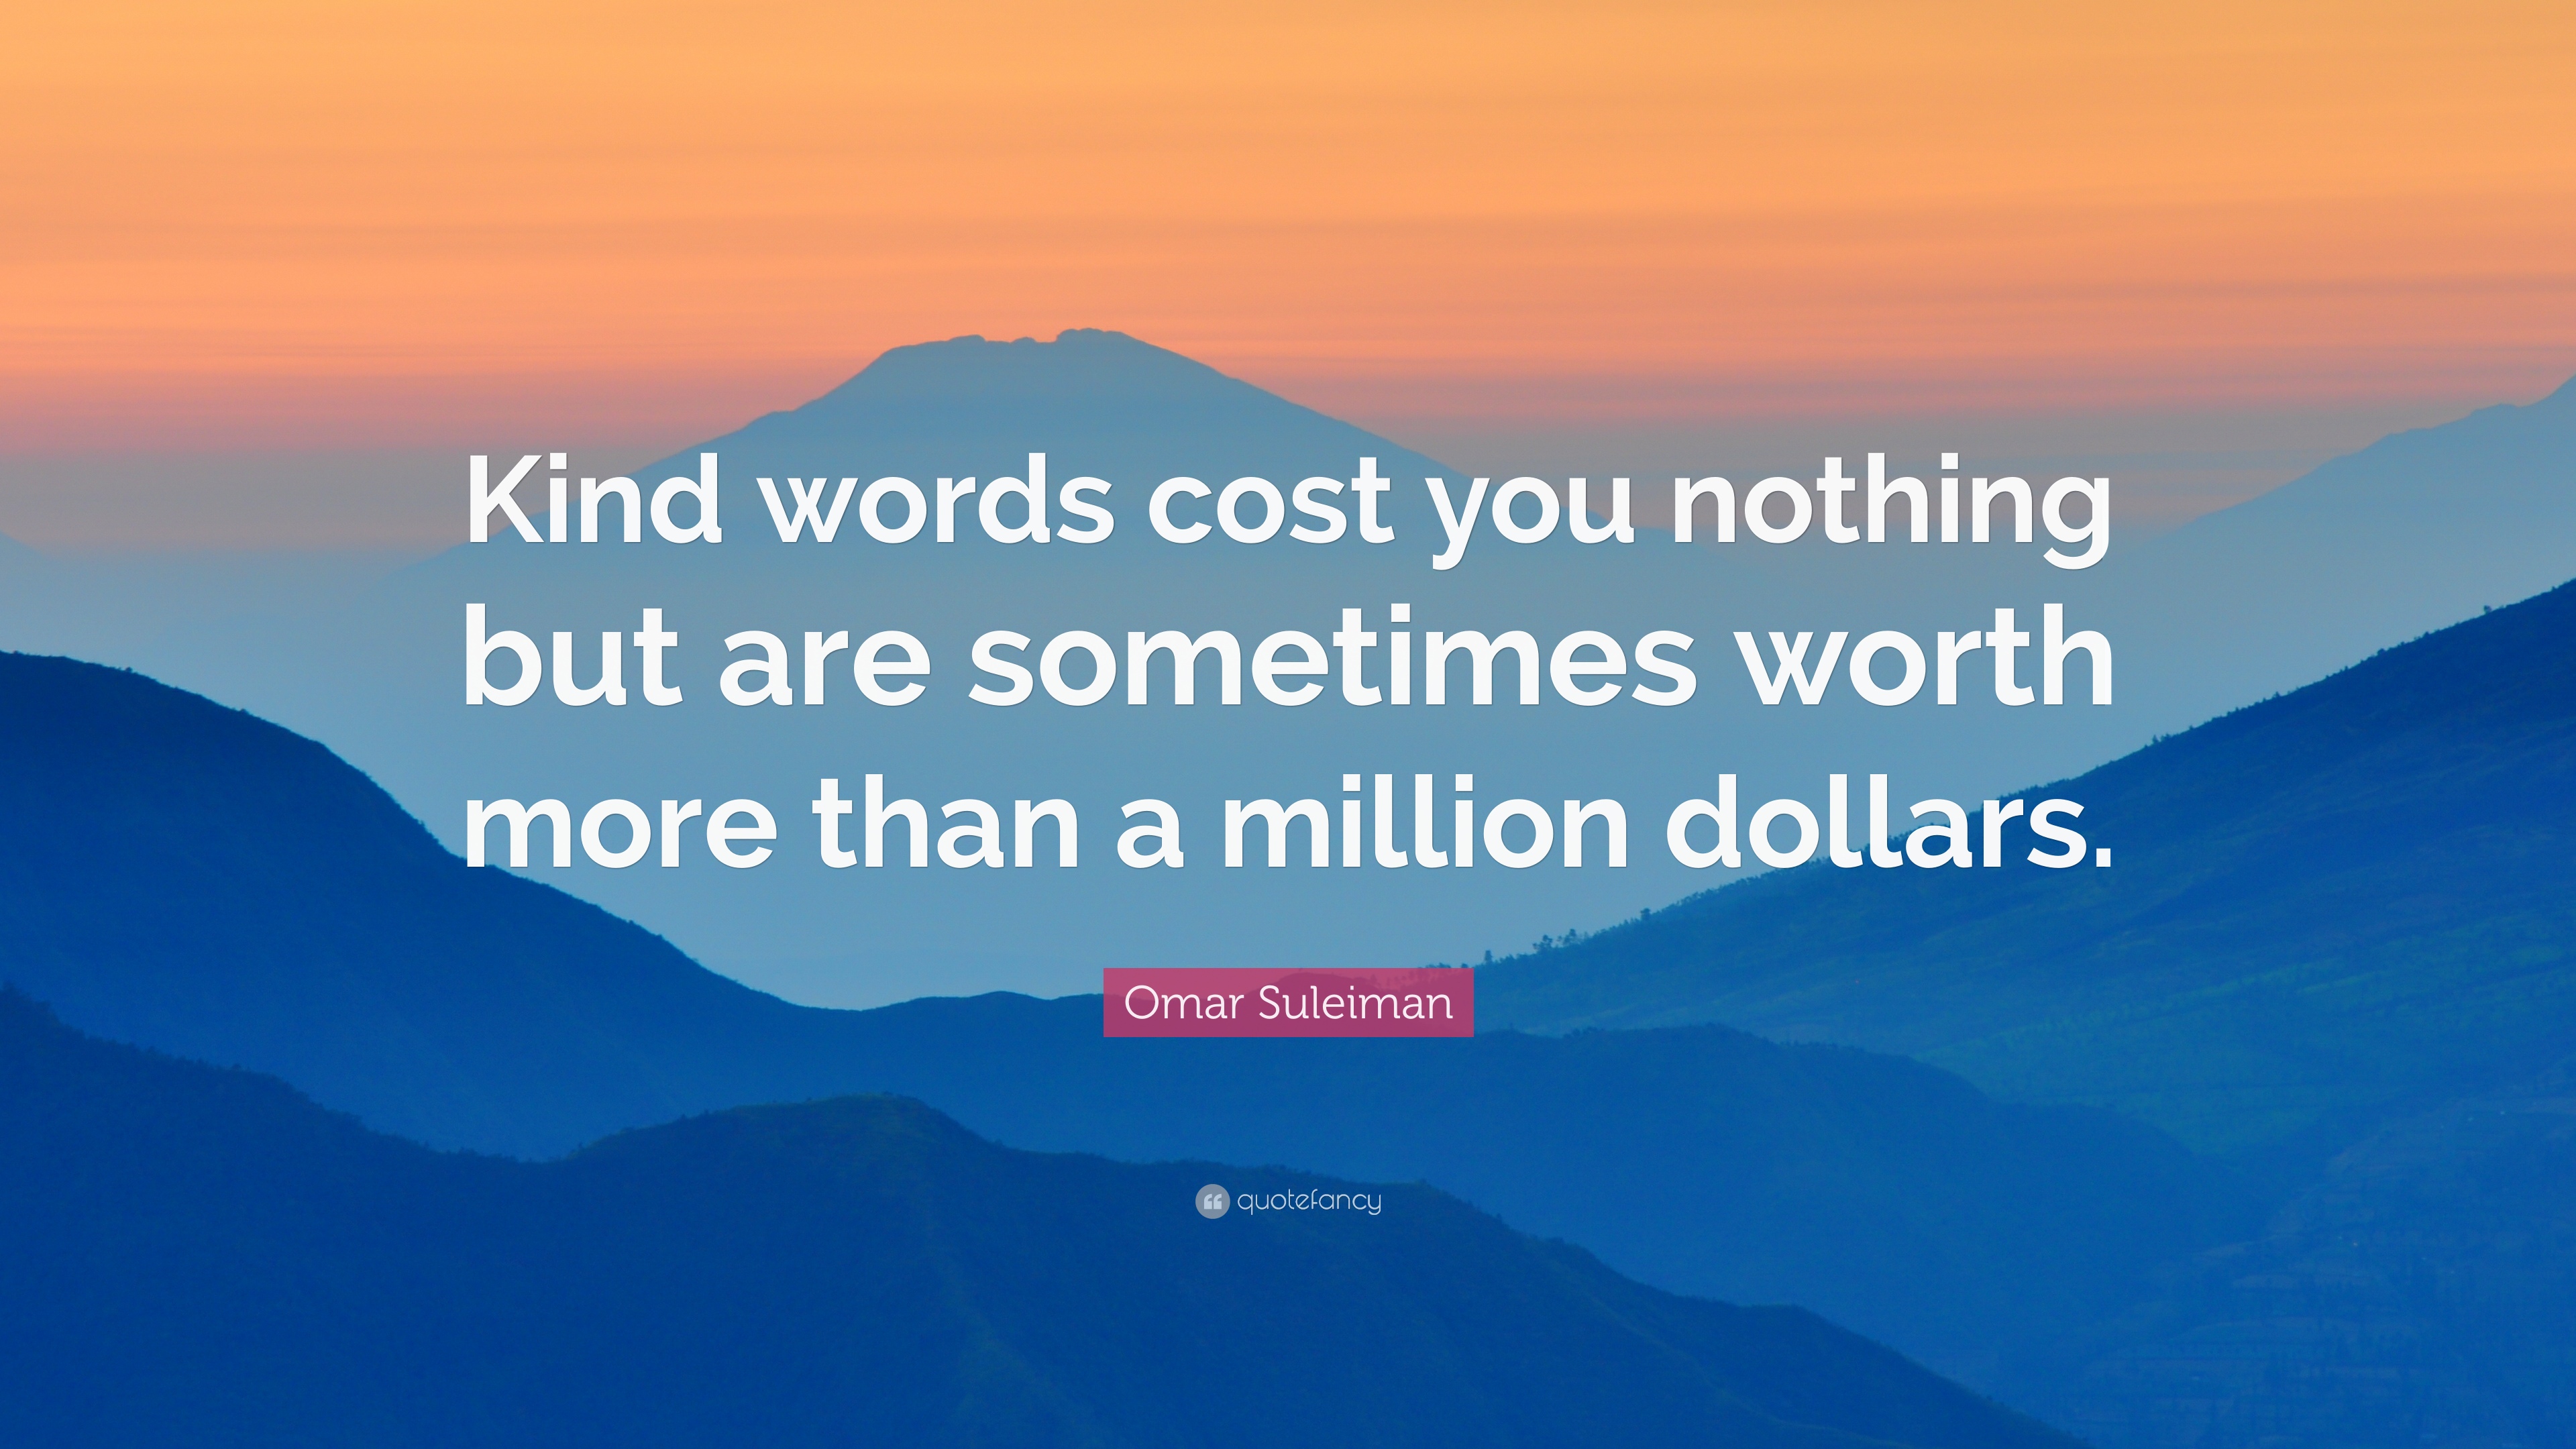 Omar Suleiman Quote: “Kind words cost you nothing but are sometimes ...